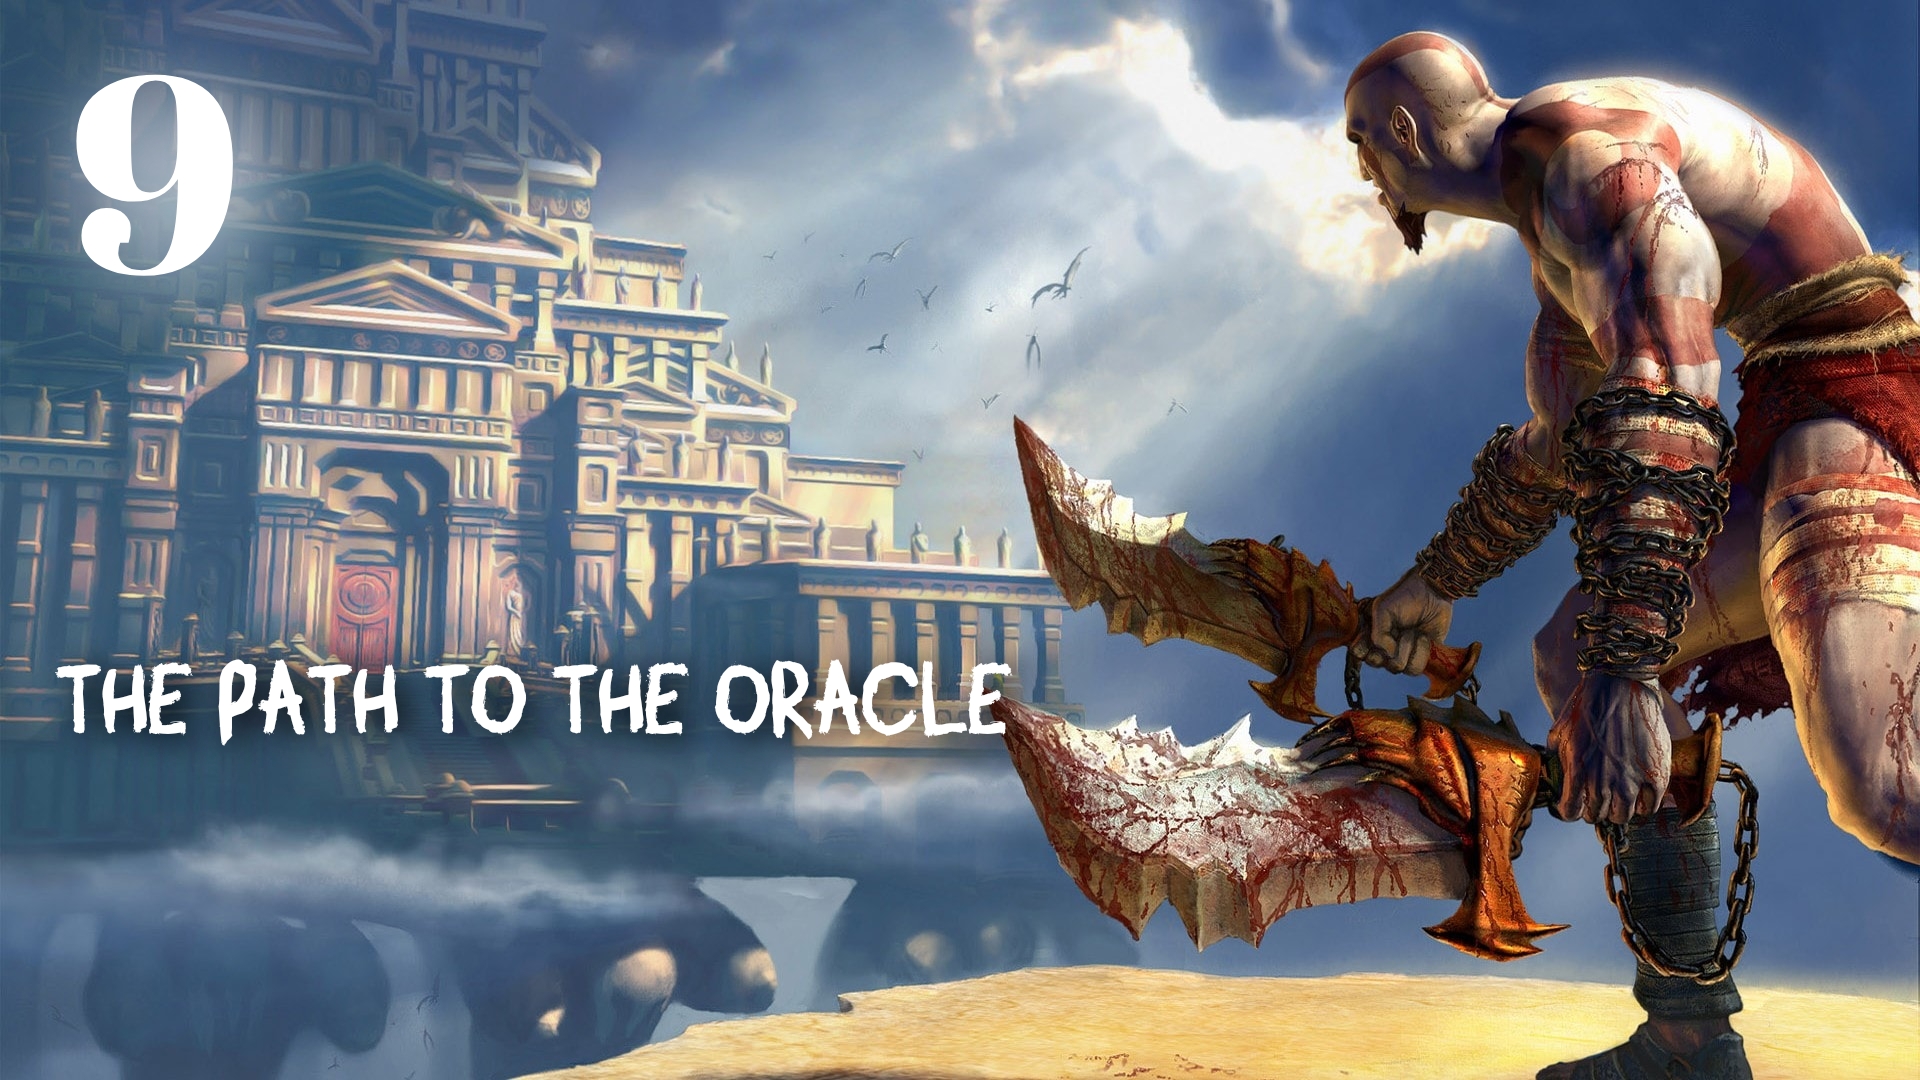 God of War HD Temple of the Oracle: The Path to the Oracle